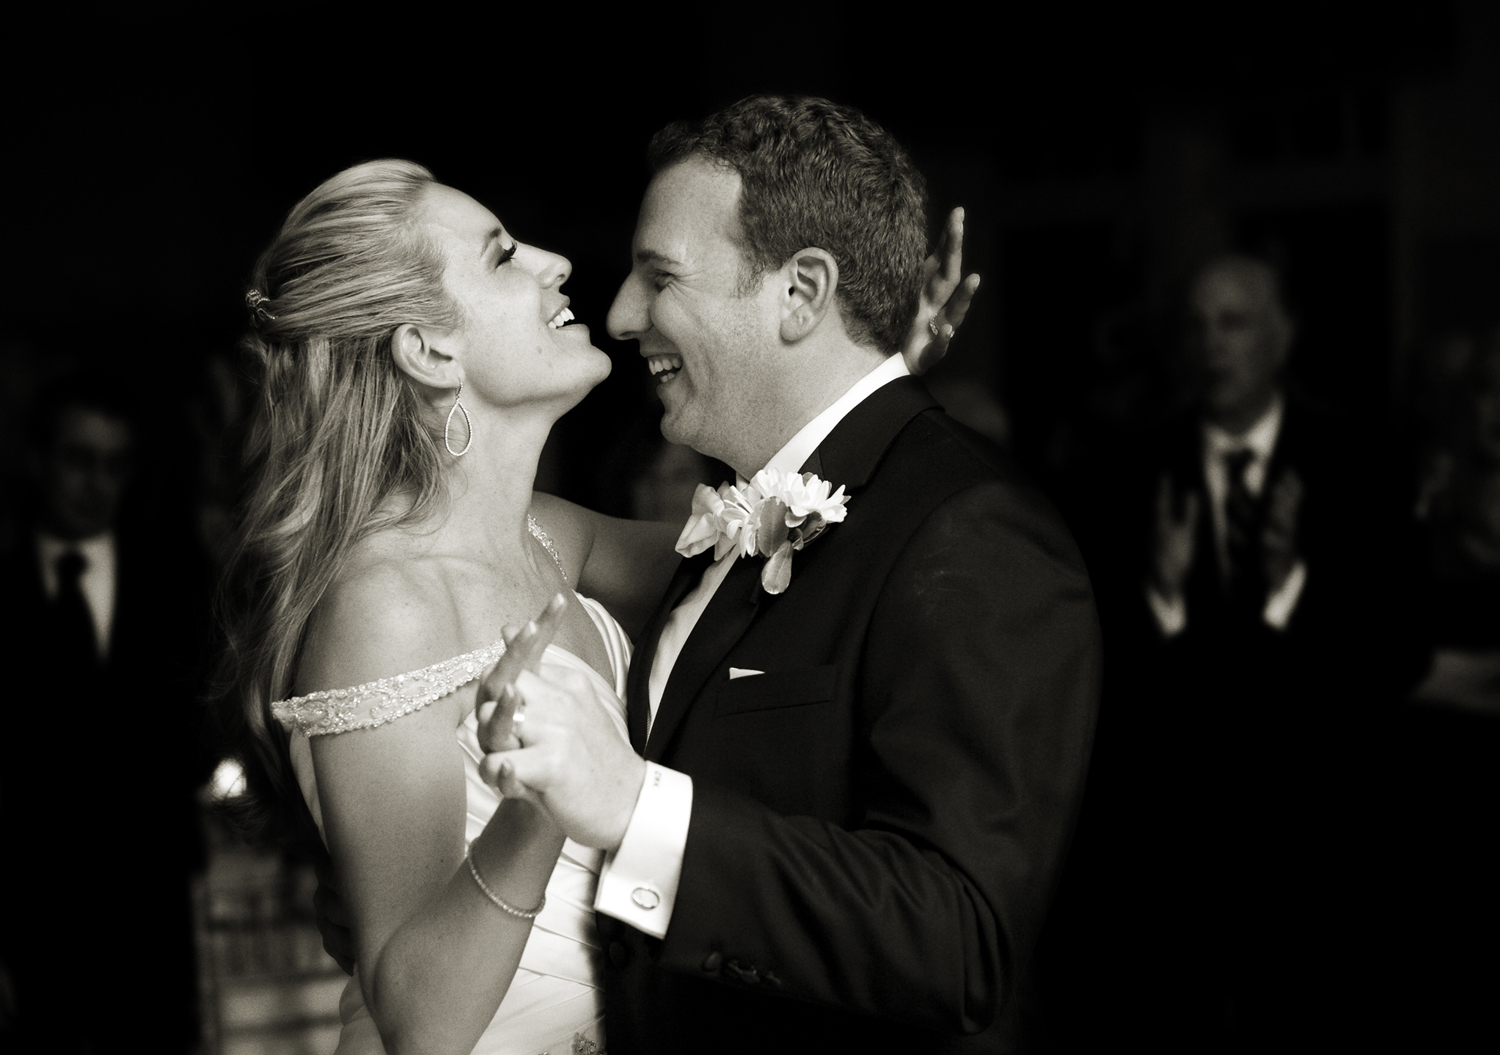 Bride and groom's first dance as married couple at their wedding at Harbor Links Country Club. NYC wedding photographers